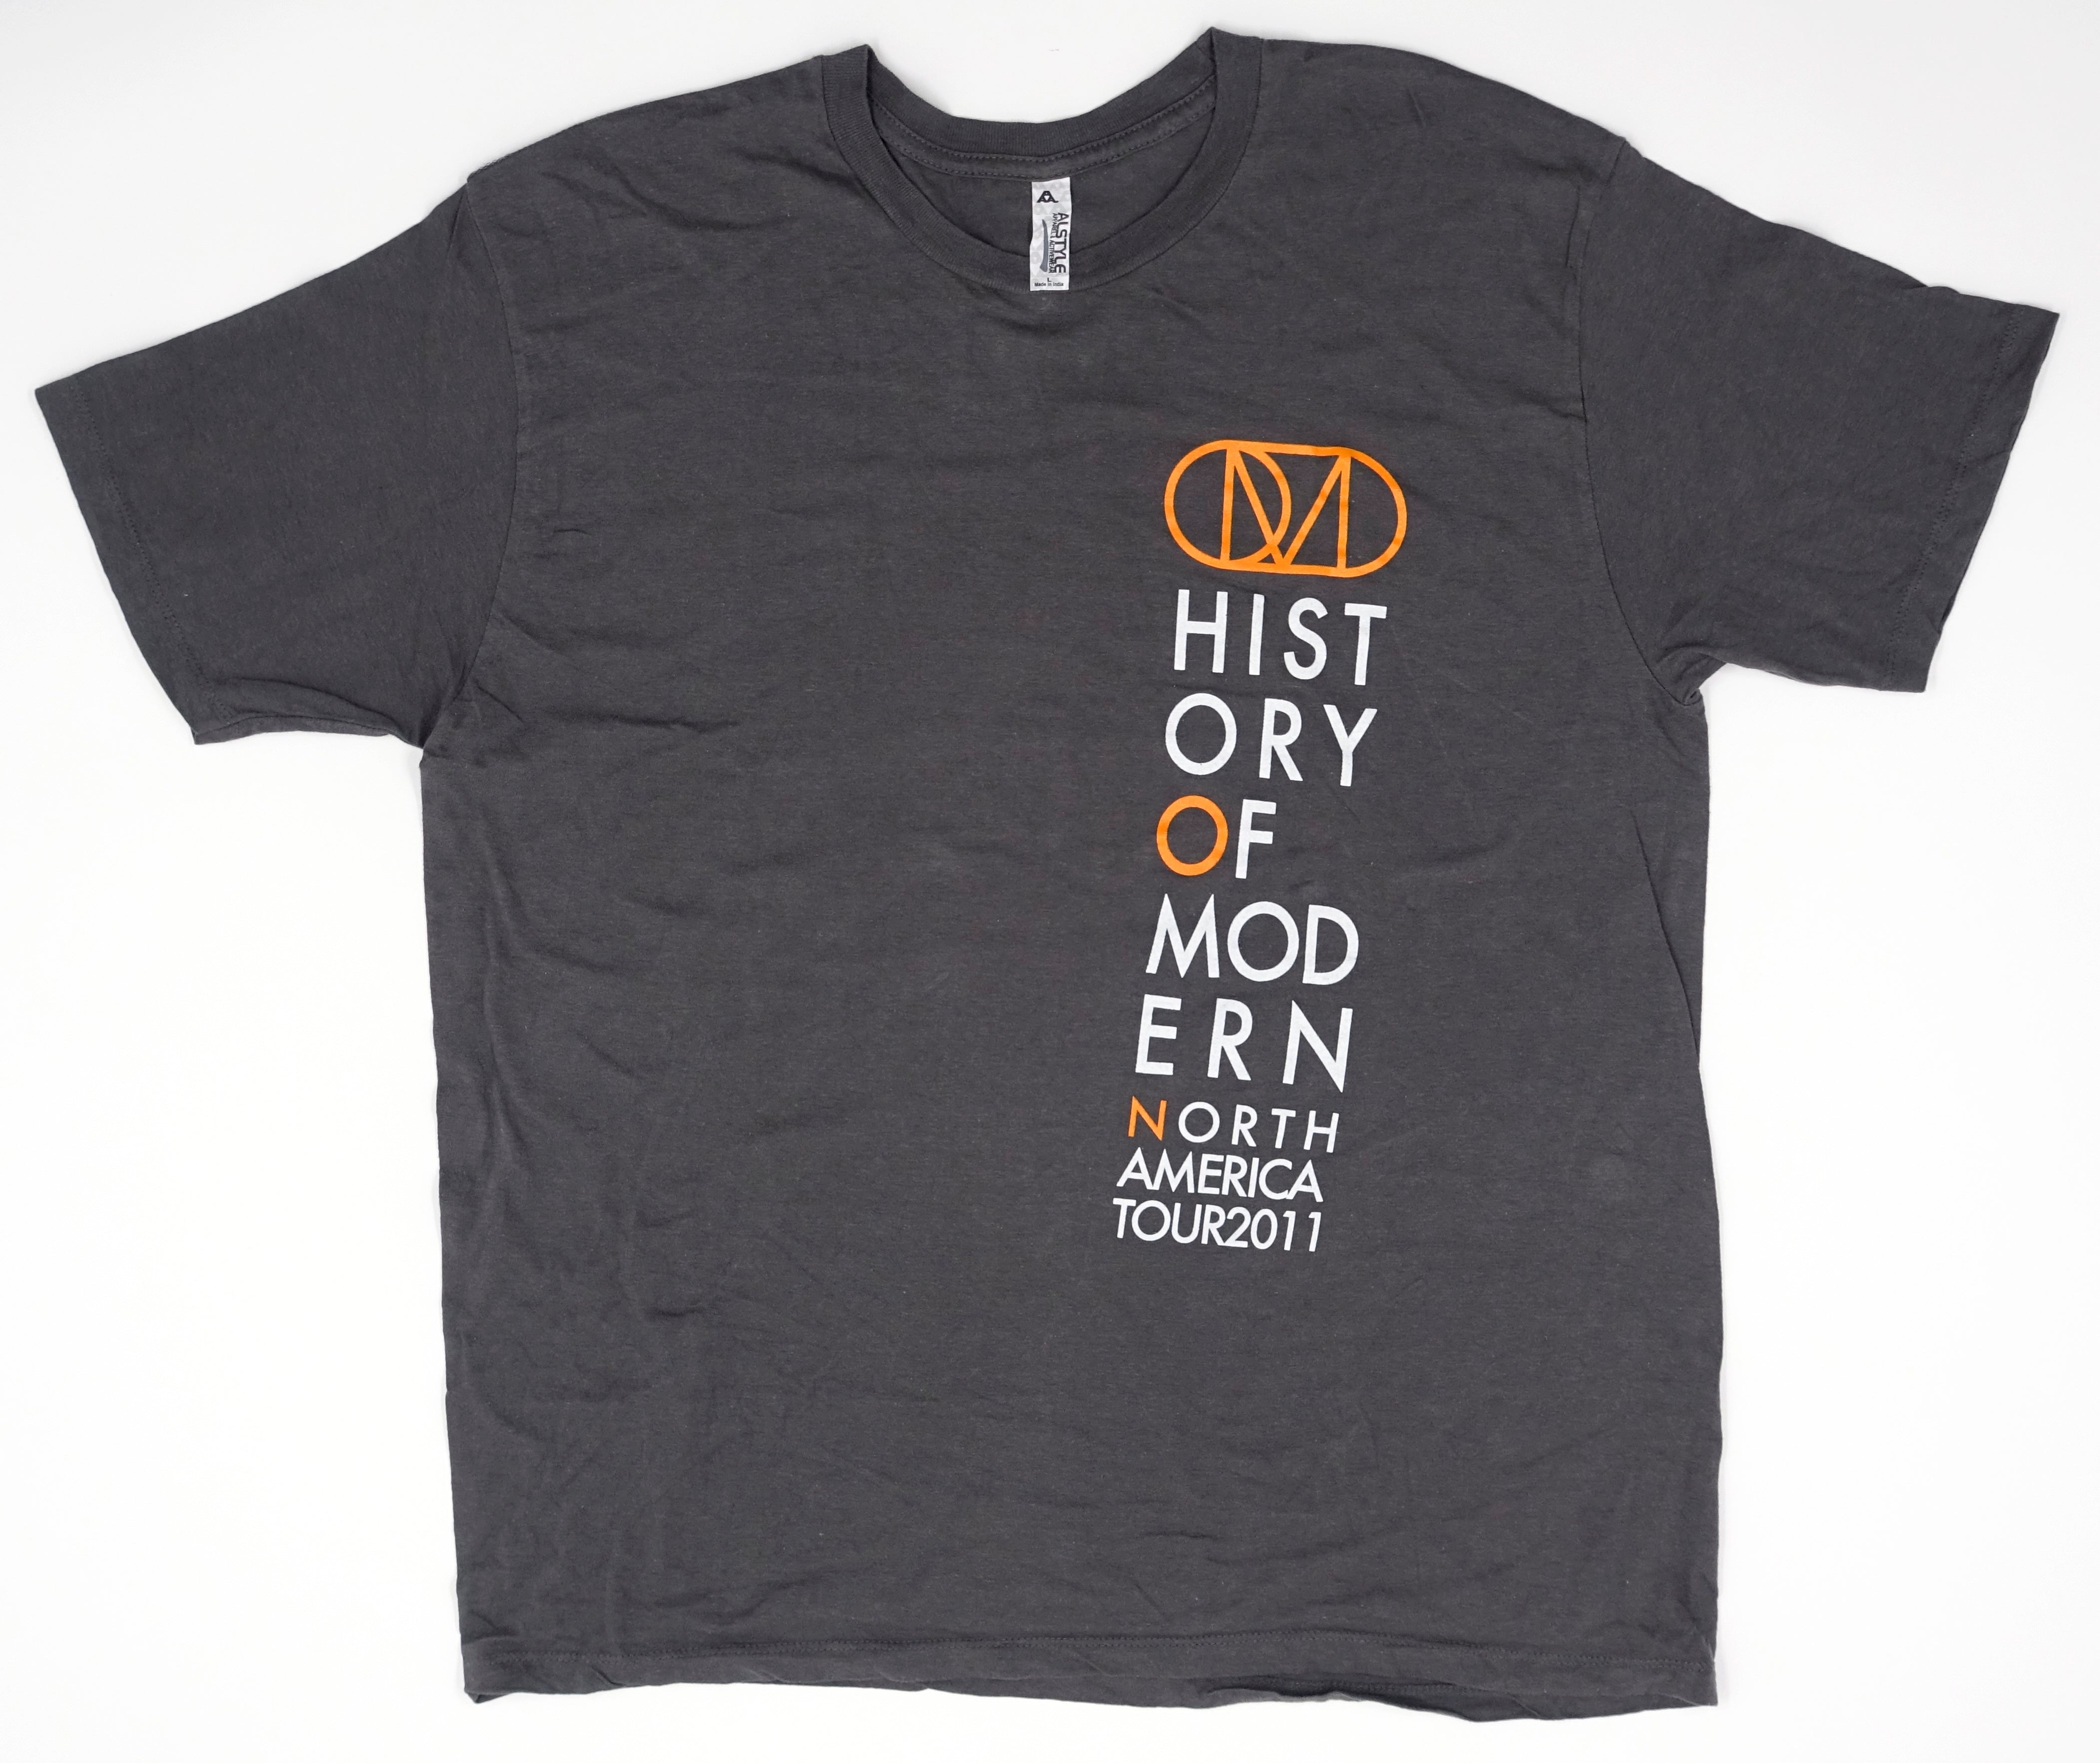 Orchestral Manoeuvres In The Dark (OMD) - History Of Modern 2011 North American Tour Shirt Size Large